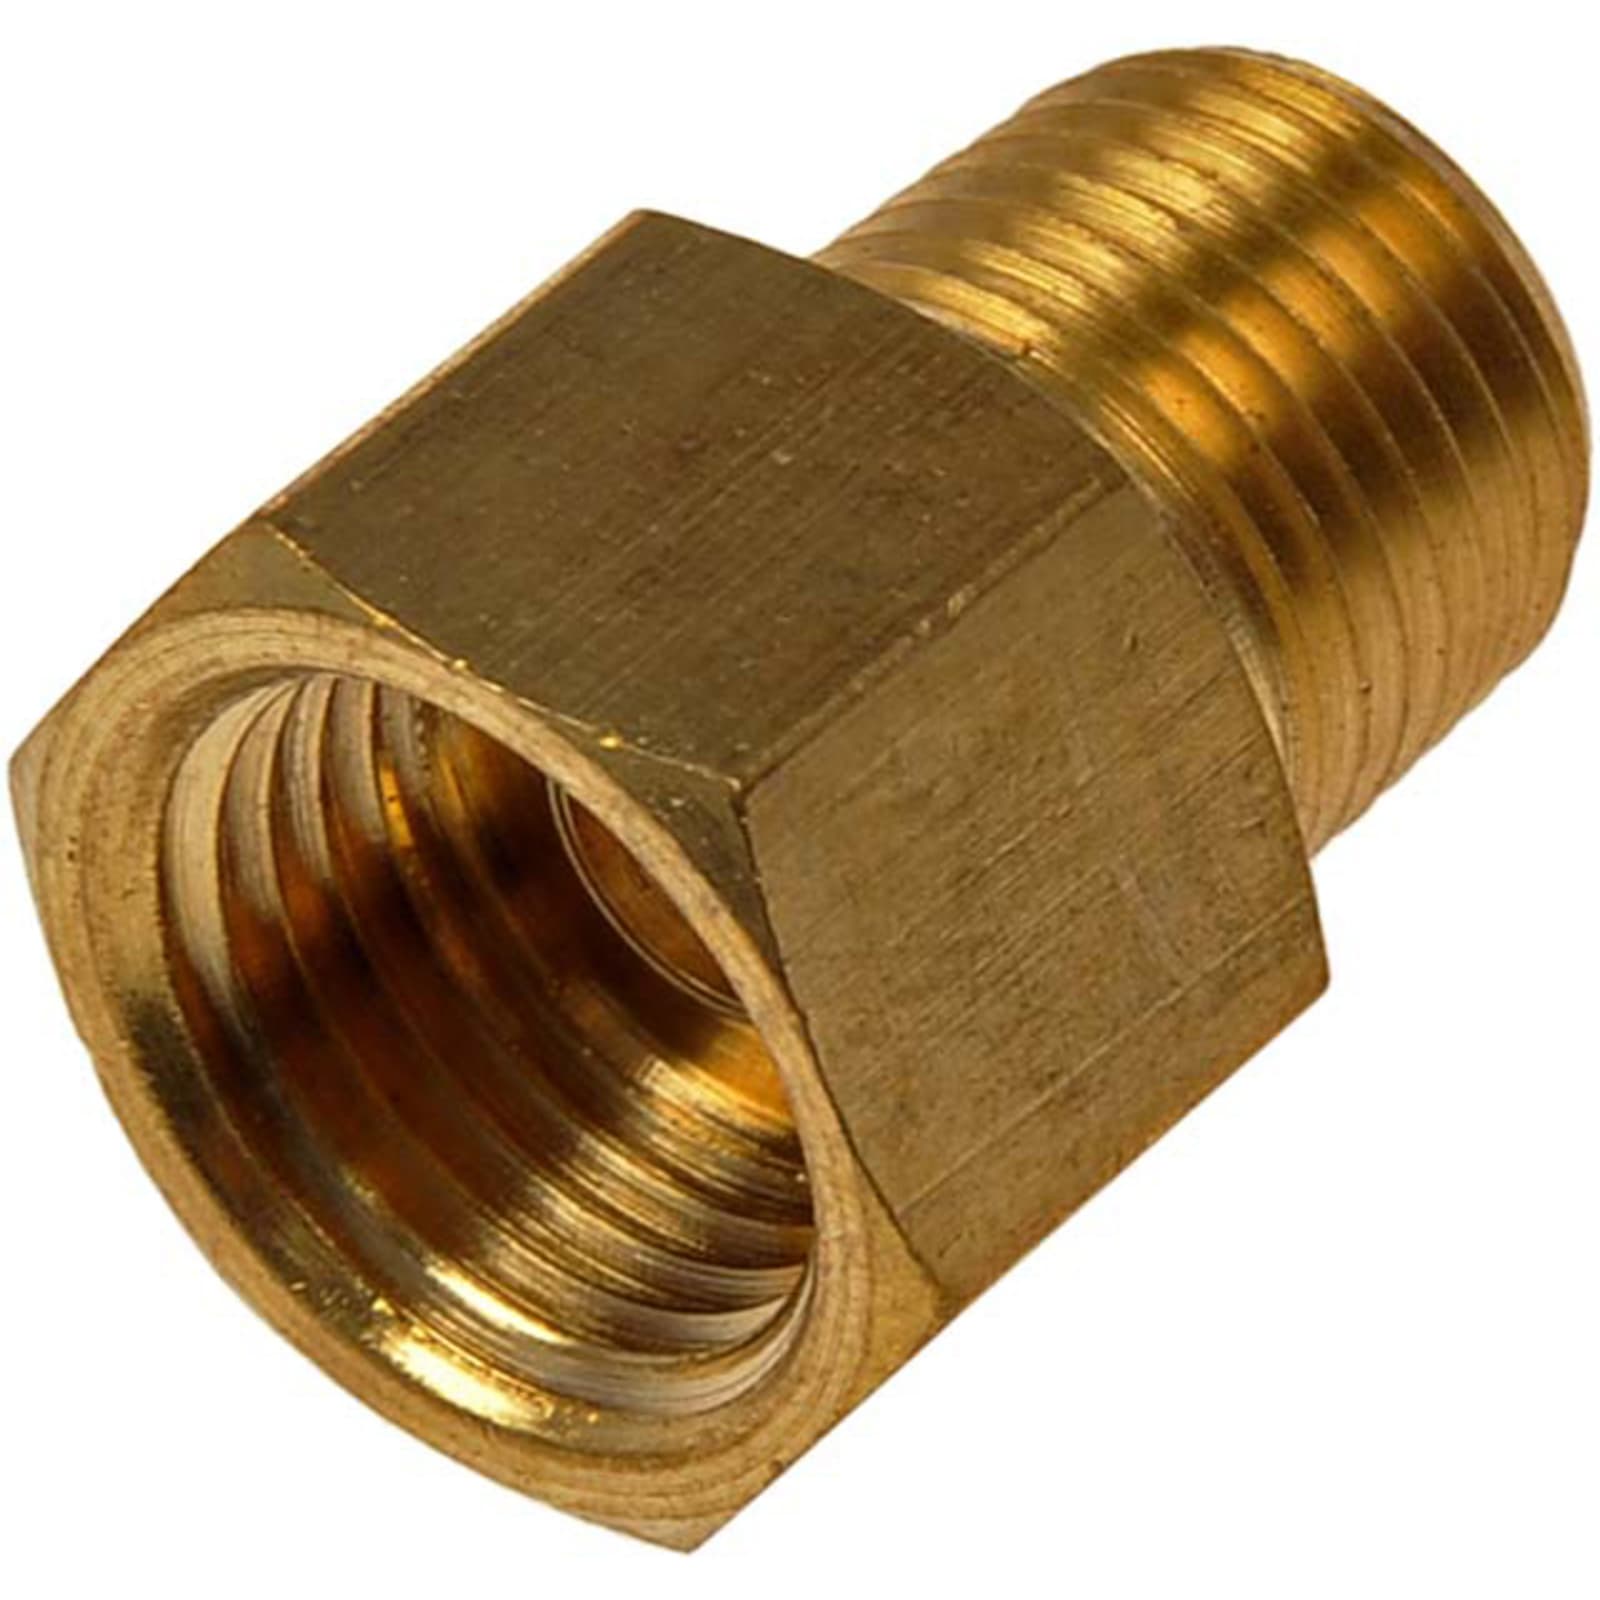 Legines Brass Compression Fitting, Male Connector, Adapter, 3/16 Tube OD x  1/4NPT Male, Pack of 2